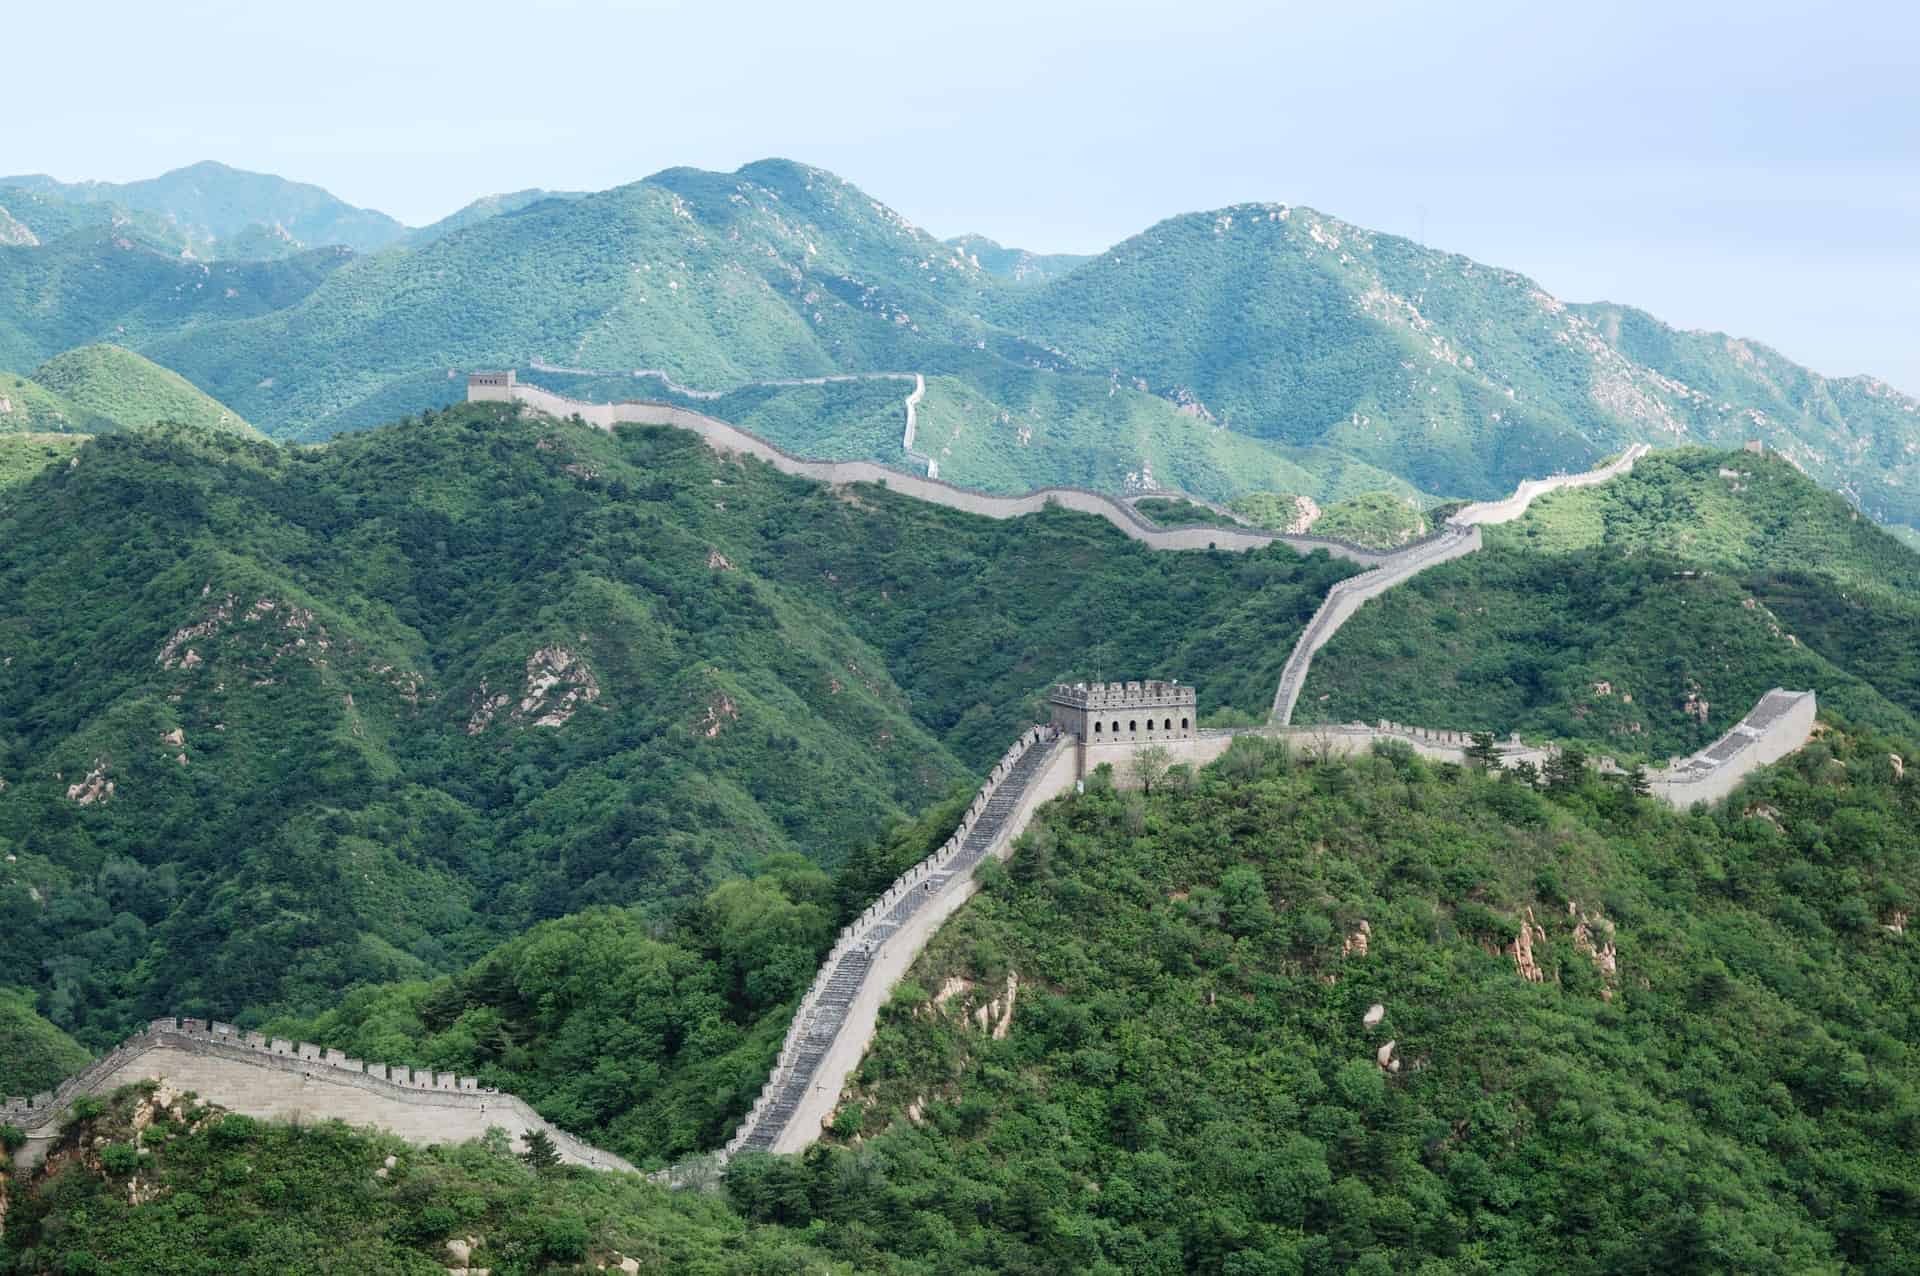 Bucket list for families ideas - Great Wall of China